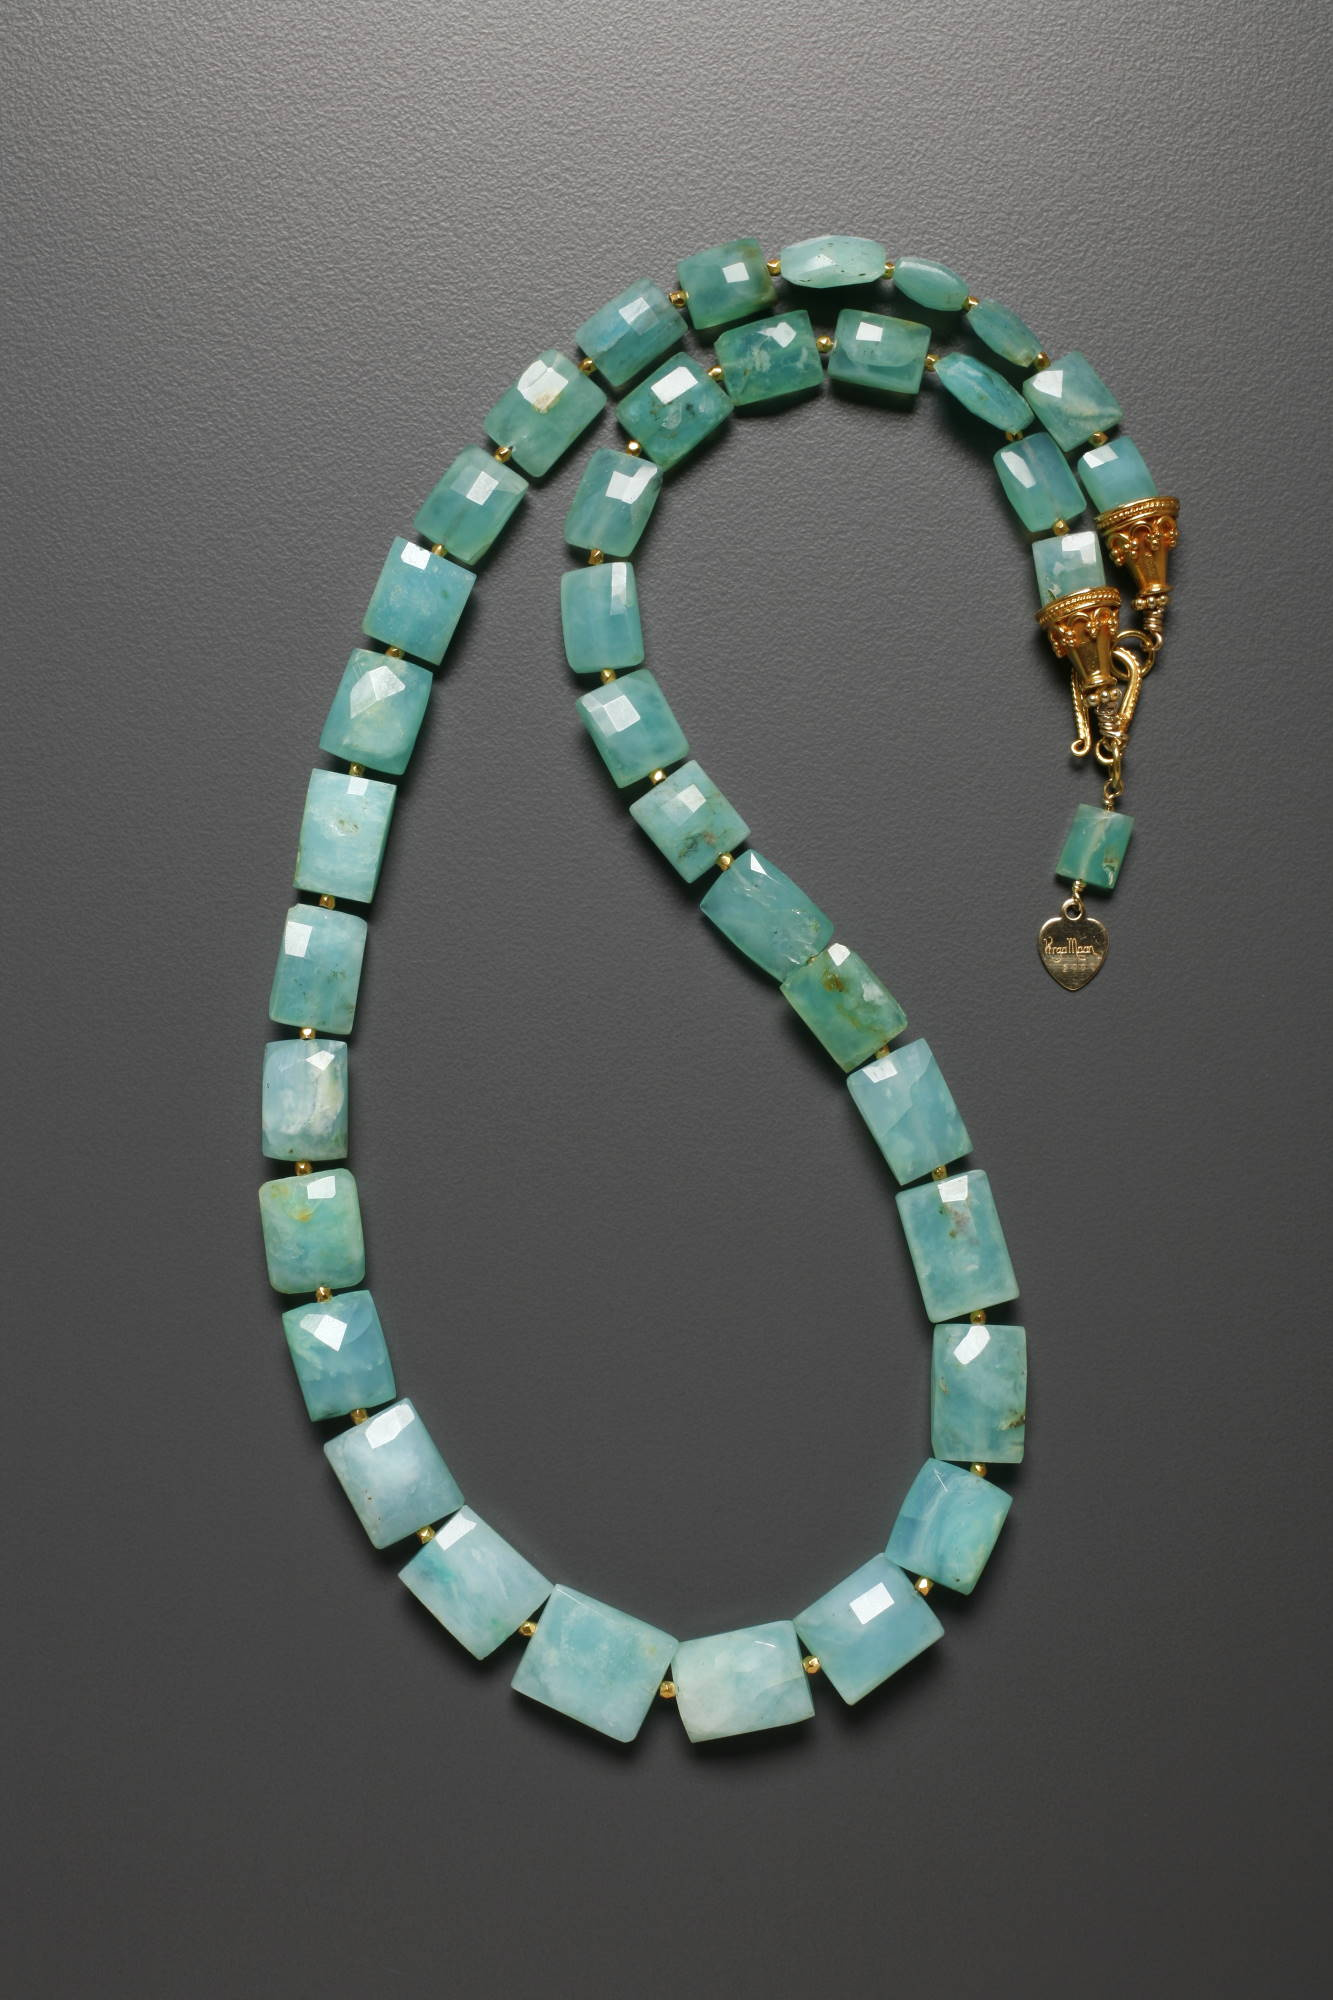 Detail of Peruvian Blue Opal Necklace